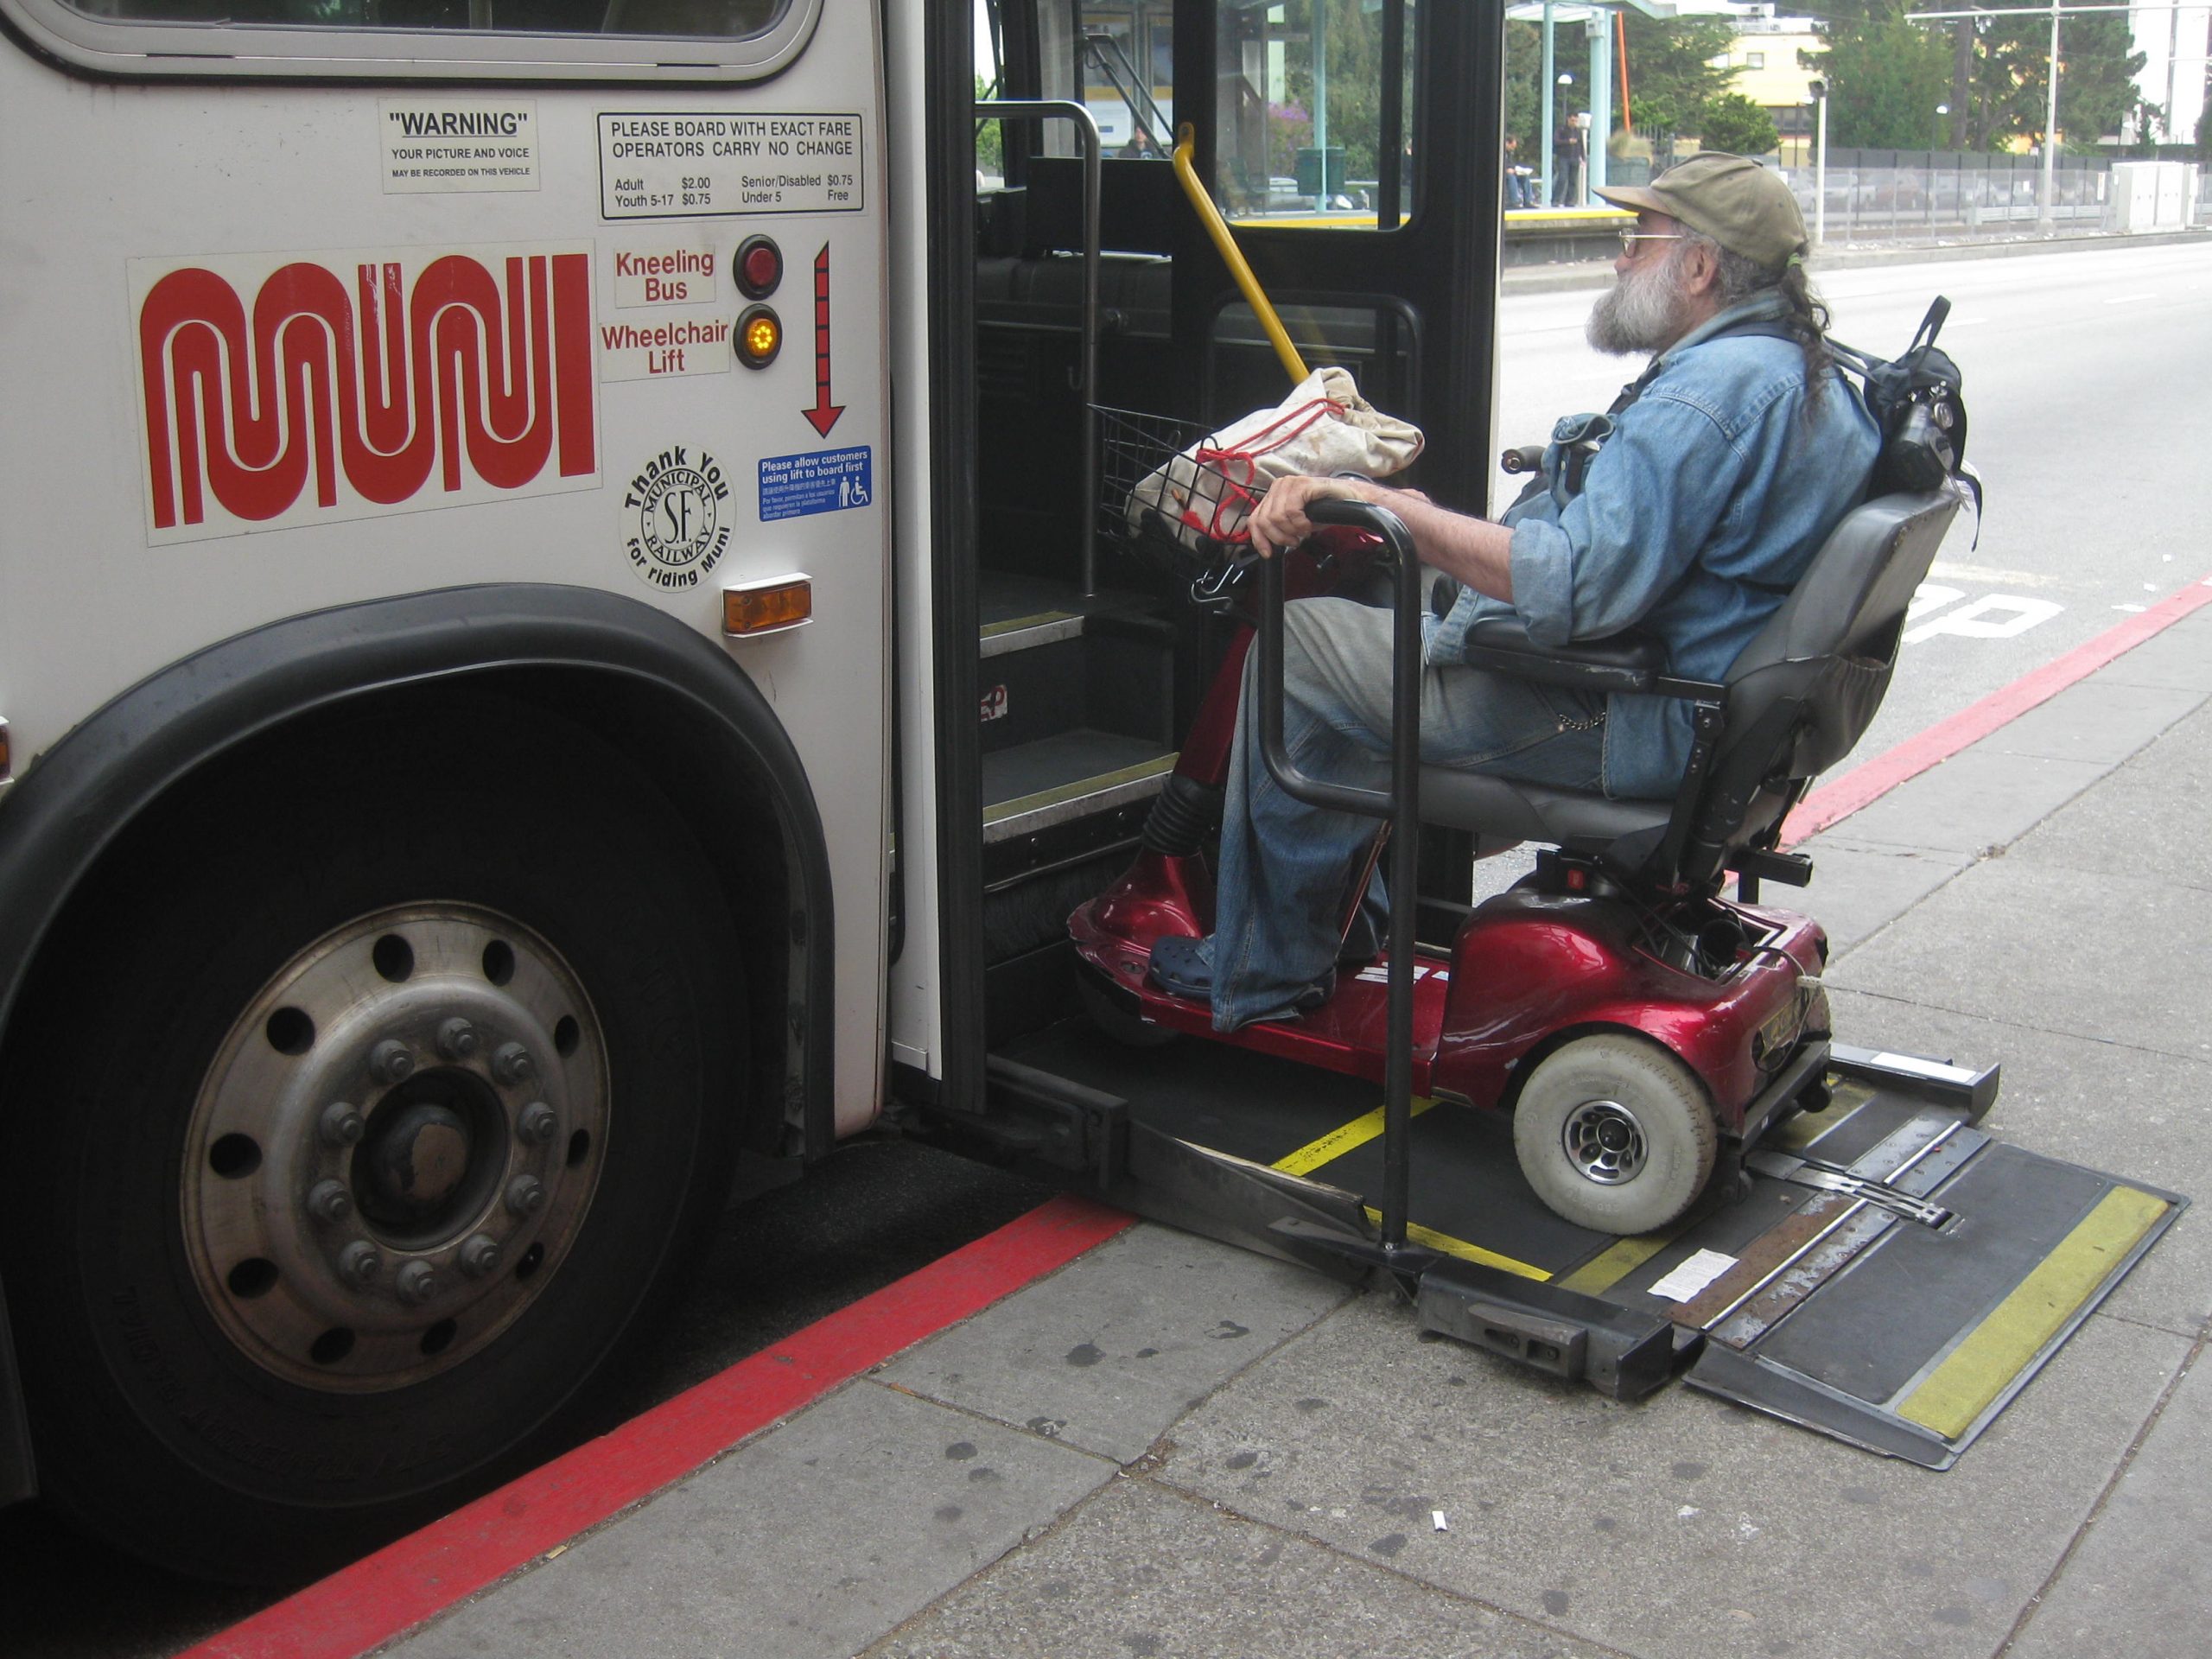 photo_wheelchair_lift_creative_commons_image_by_flickr_user_michael_ocampo.jpg